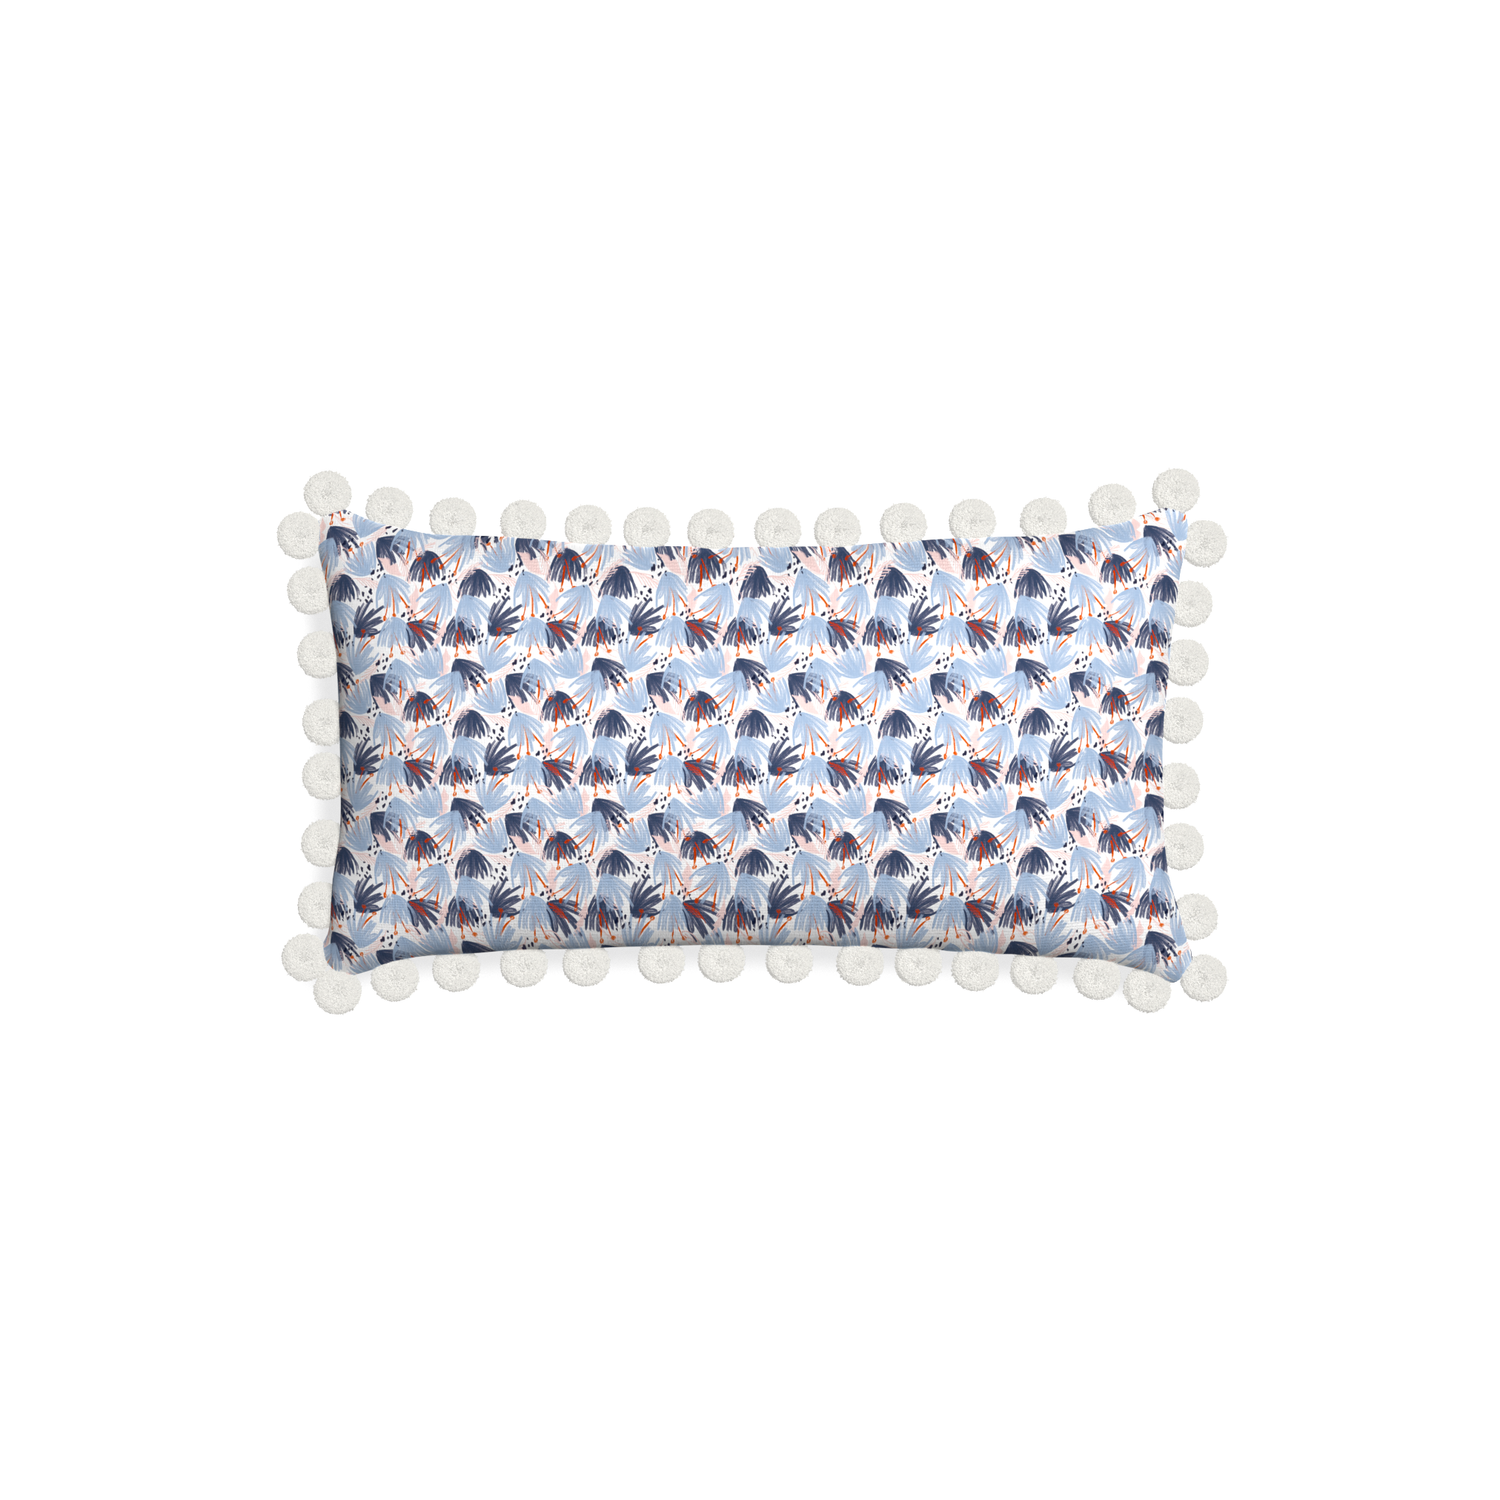 Petite-lumbar eden blue custom red and bluepillow with snow pom pom on white background